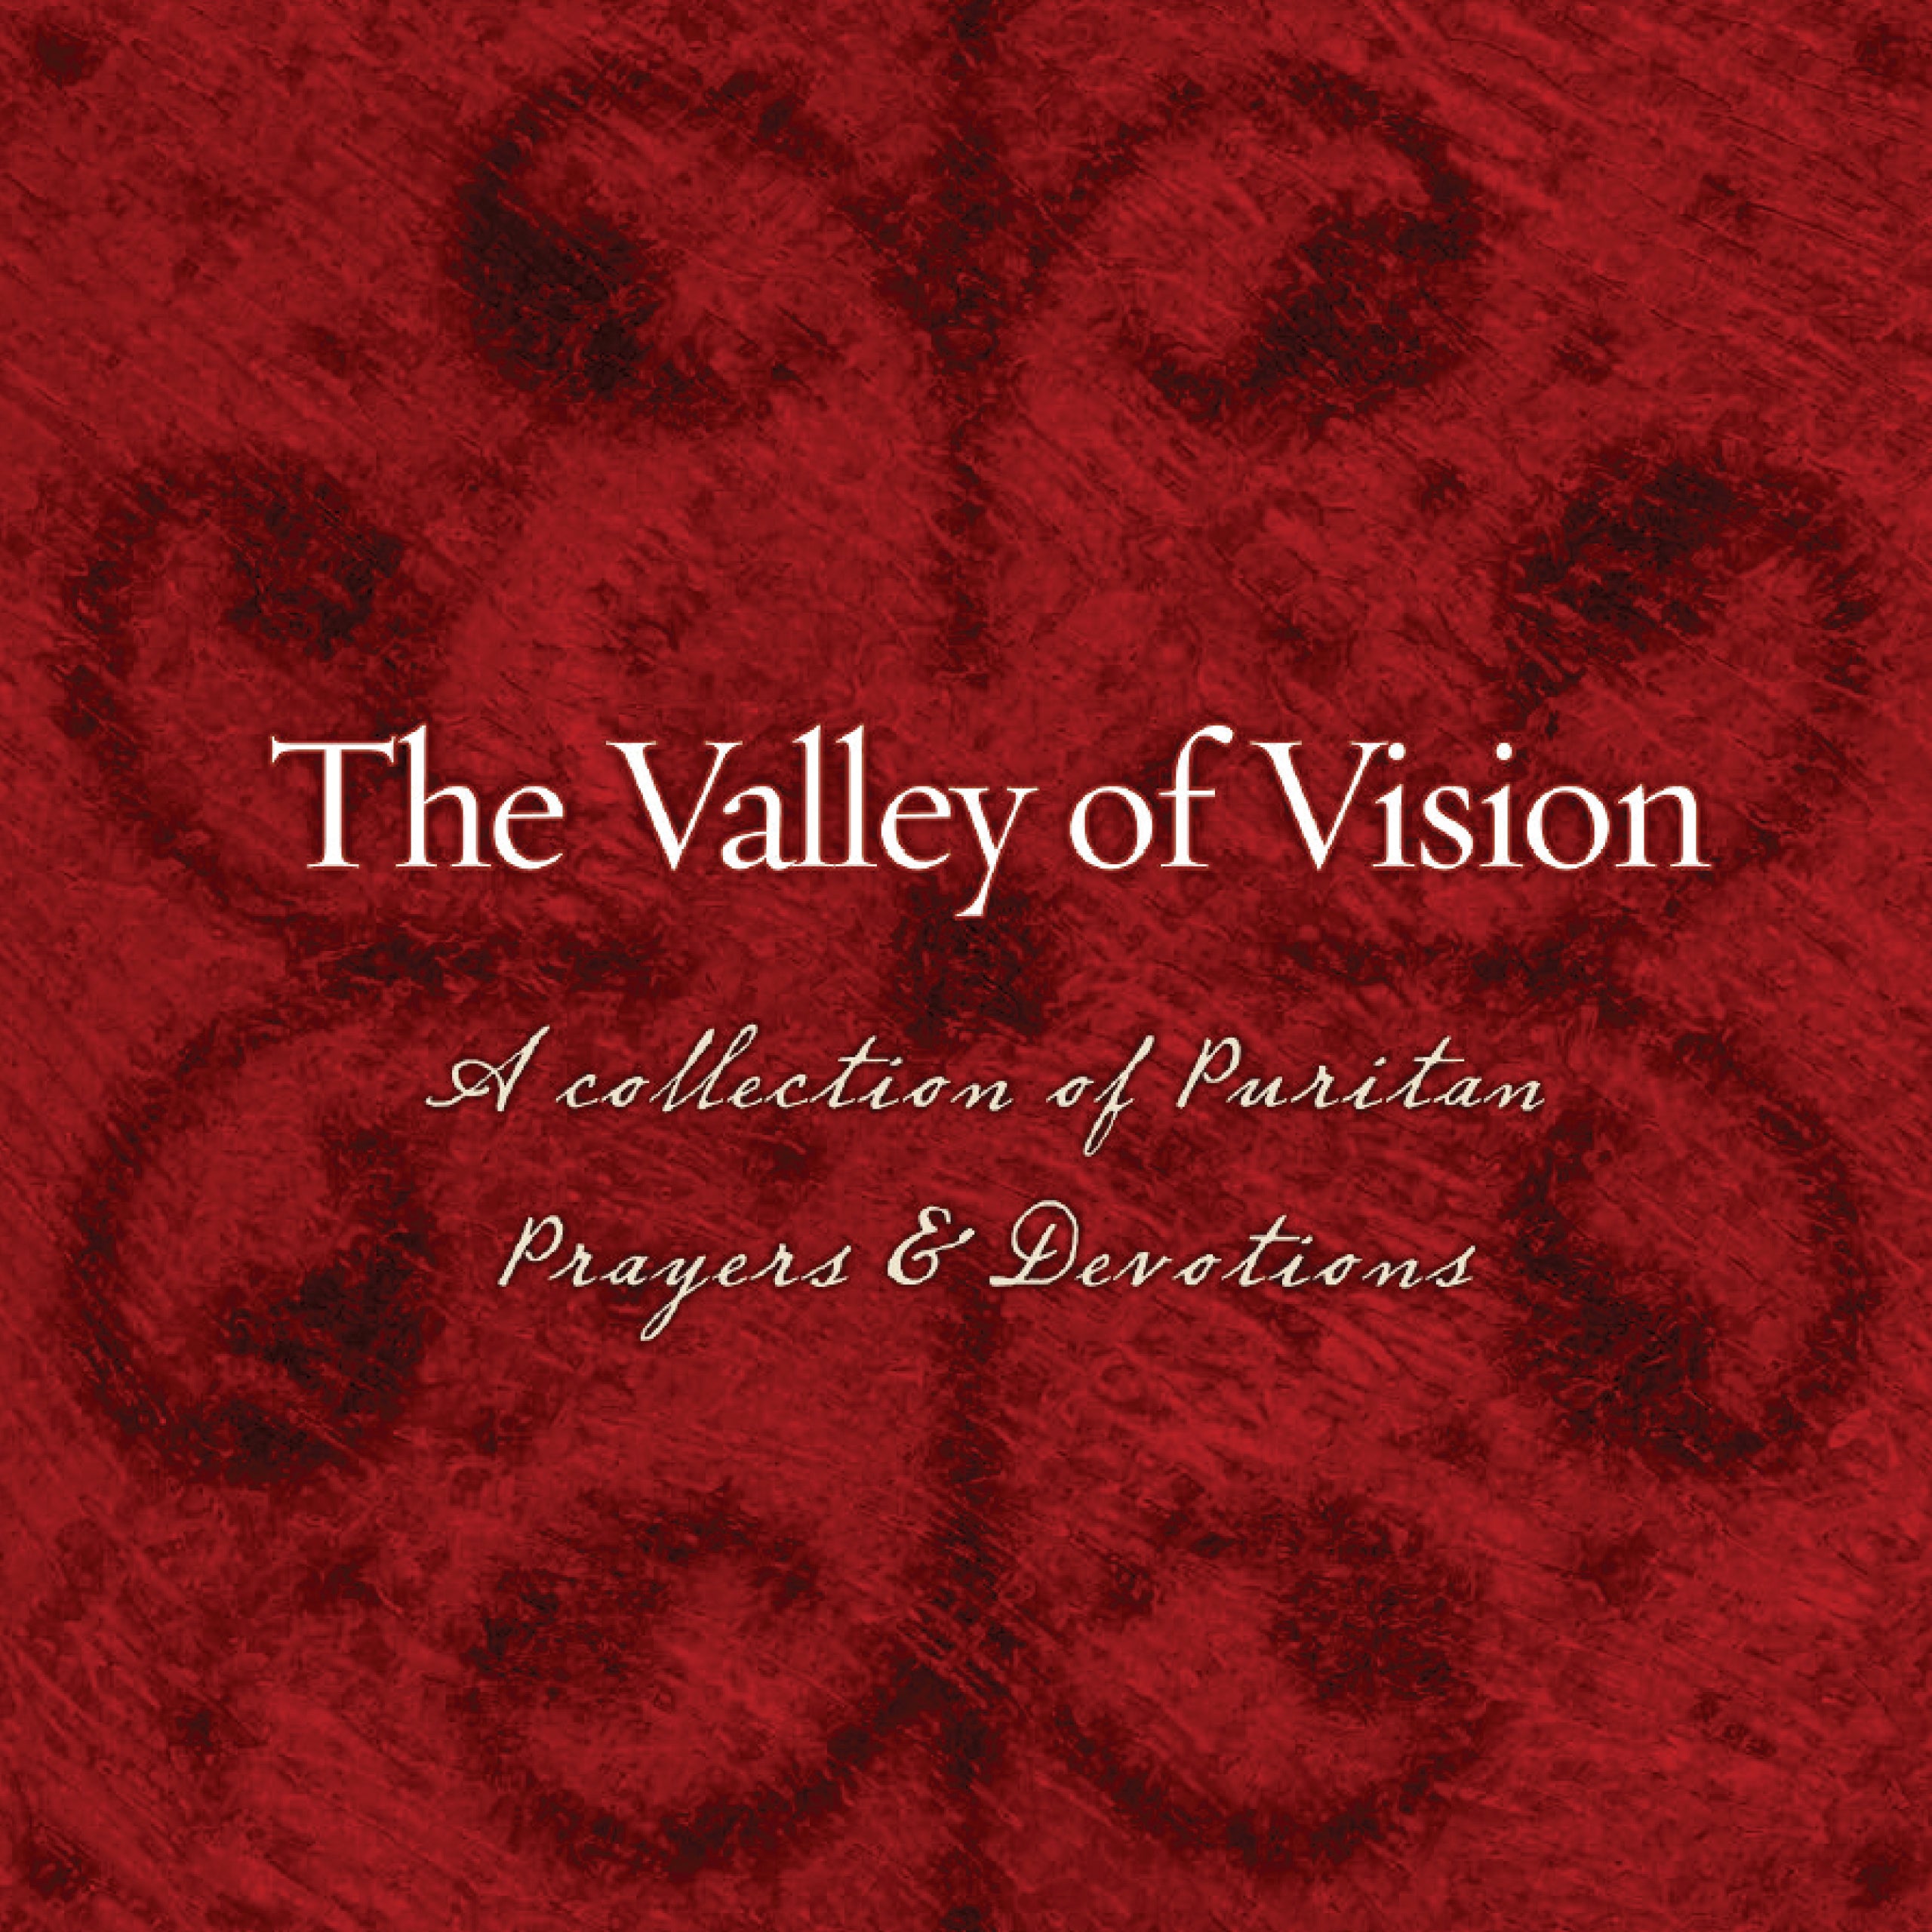 The Valley of Vision: A Collection of Puritan Prayers and Devotions [Book]